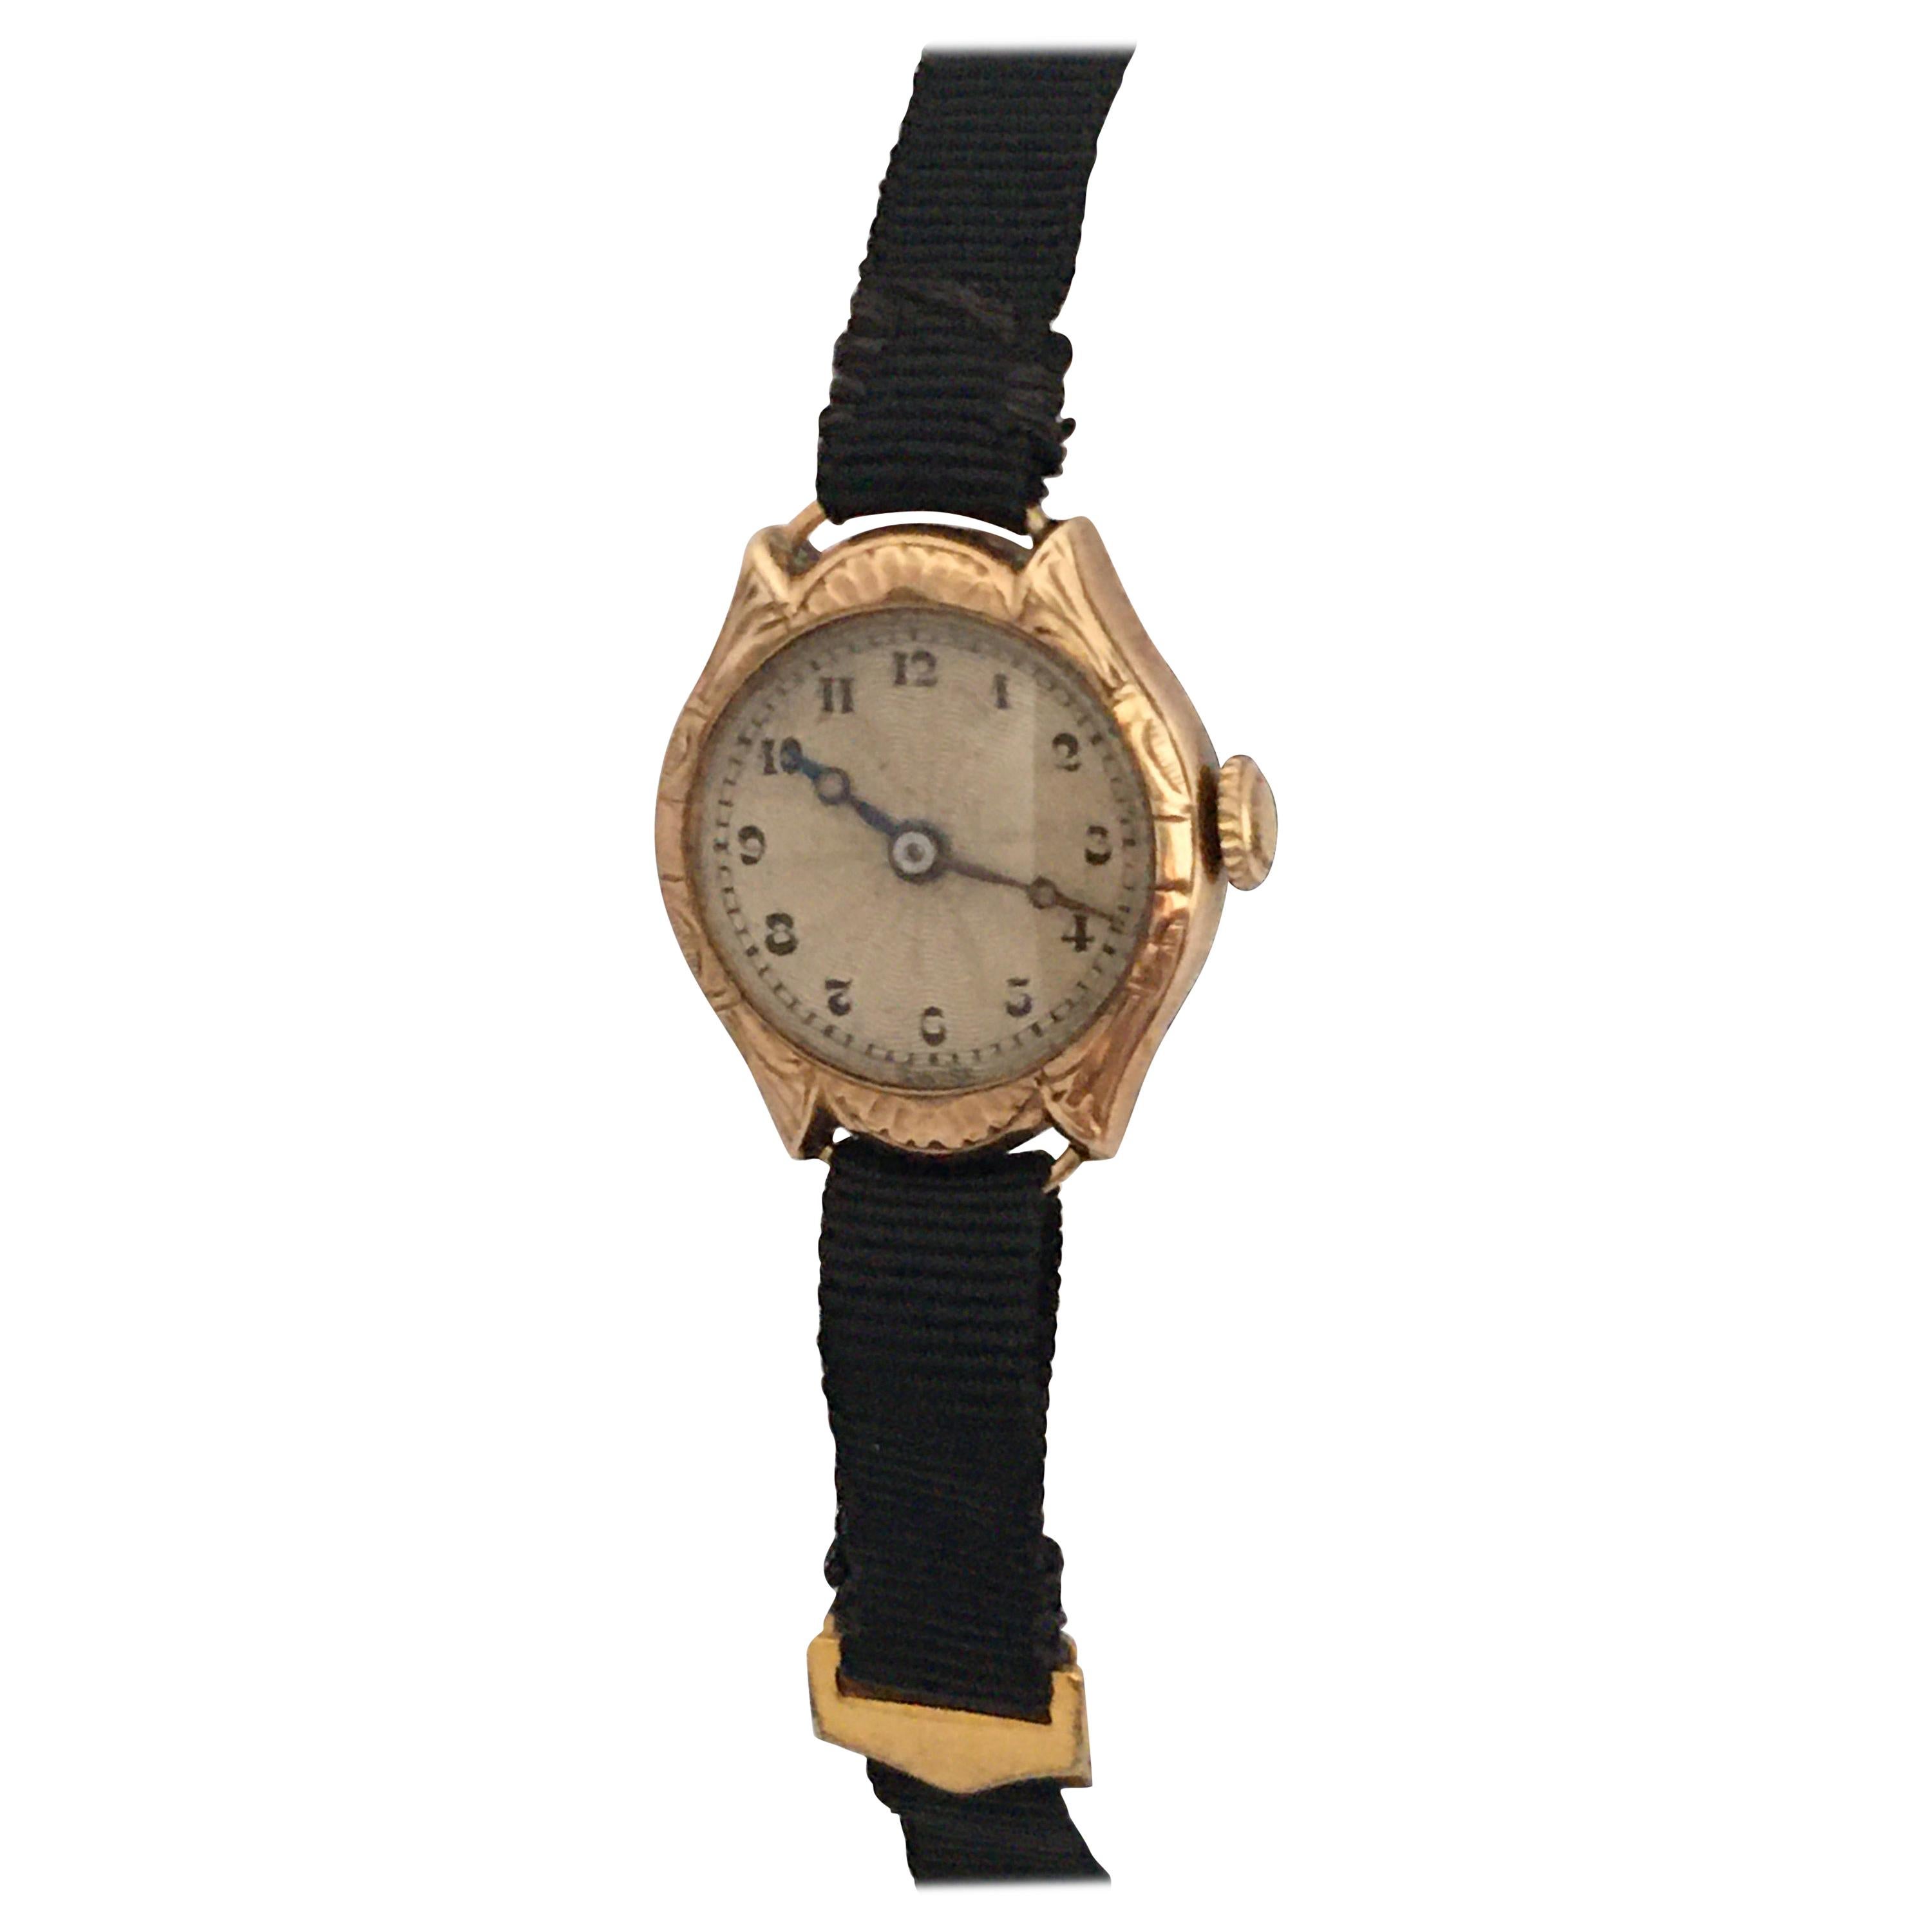 This beautiful vintage gold ladies hand winding watch is working and it is recently been serviced and runs well, (good time keeping). Visible signs of ageing and wear. the silvered dial has aged as shown. It is fitted with a black cloth strap. as